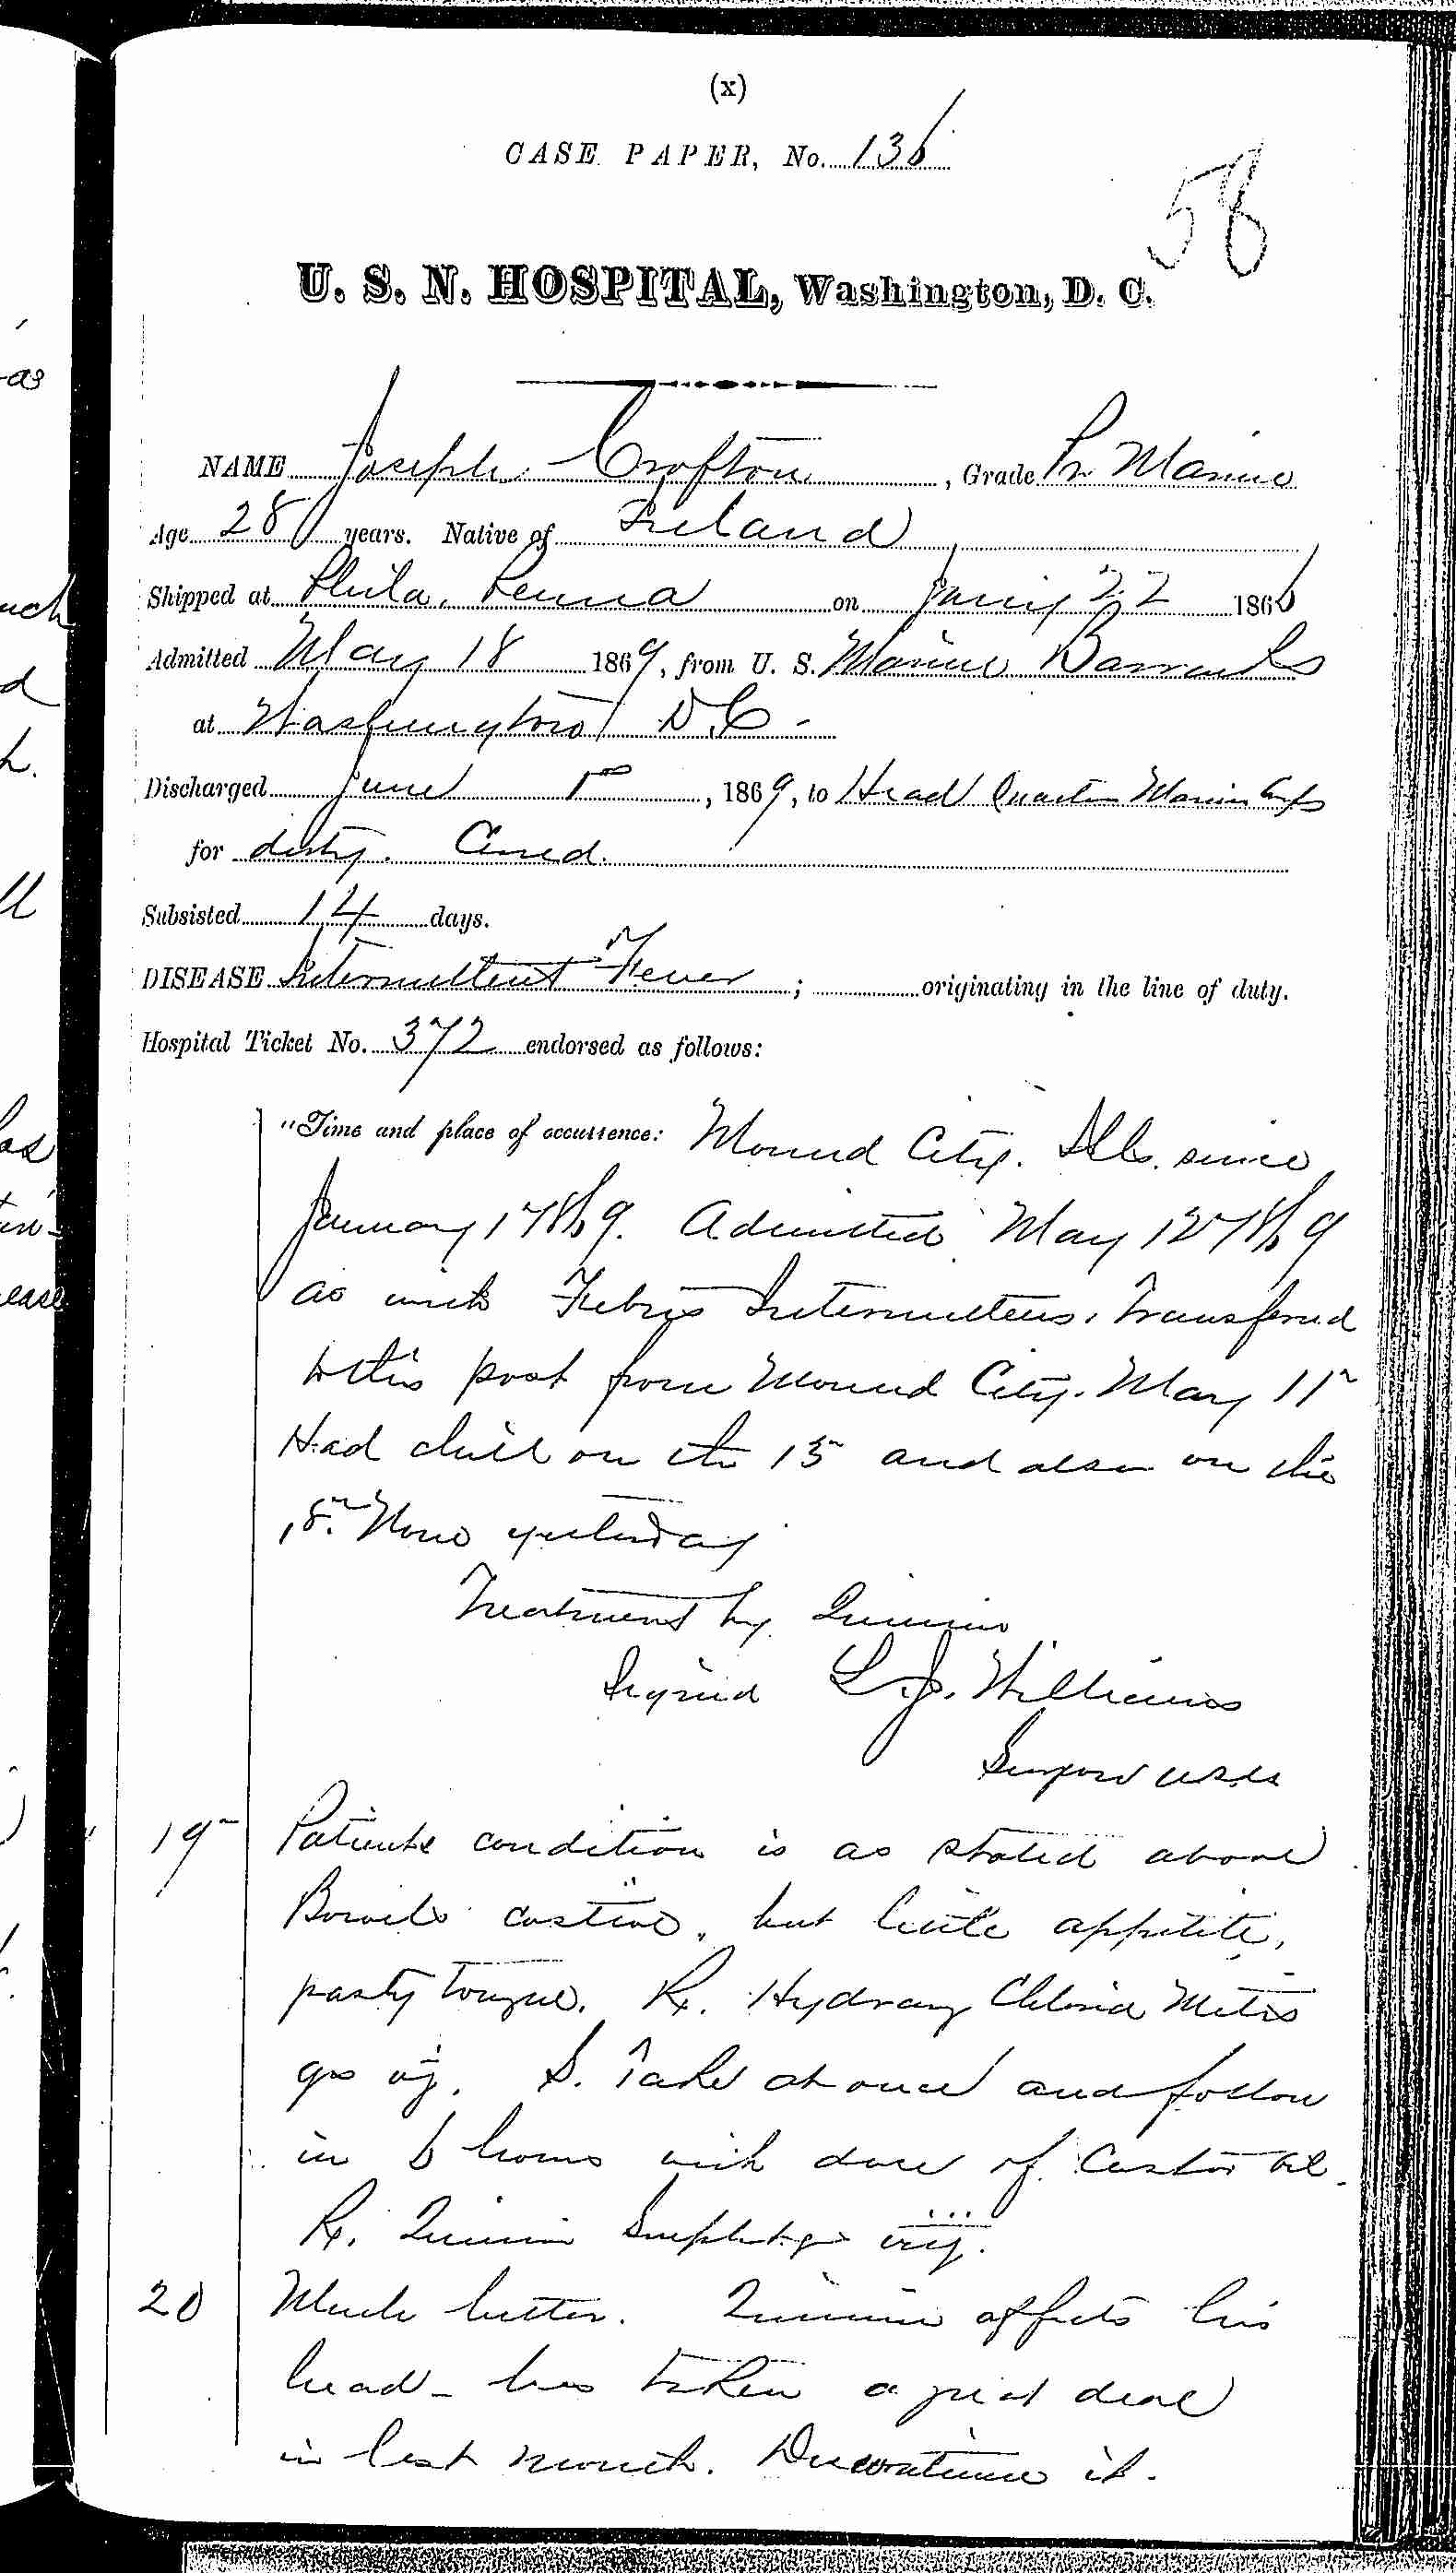 Entry for Joseph Crofton (page 1 of 2) in the log Hospital Tickets and Case Papers - Naval Hospital - Washington, D.C. - 1868-69